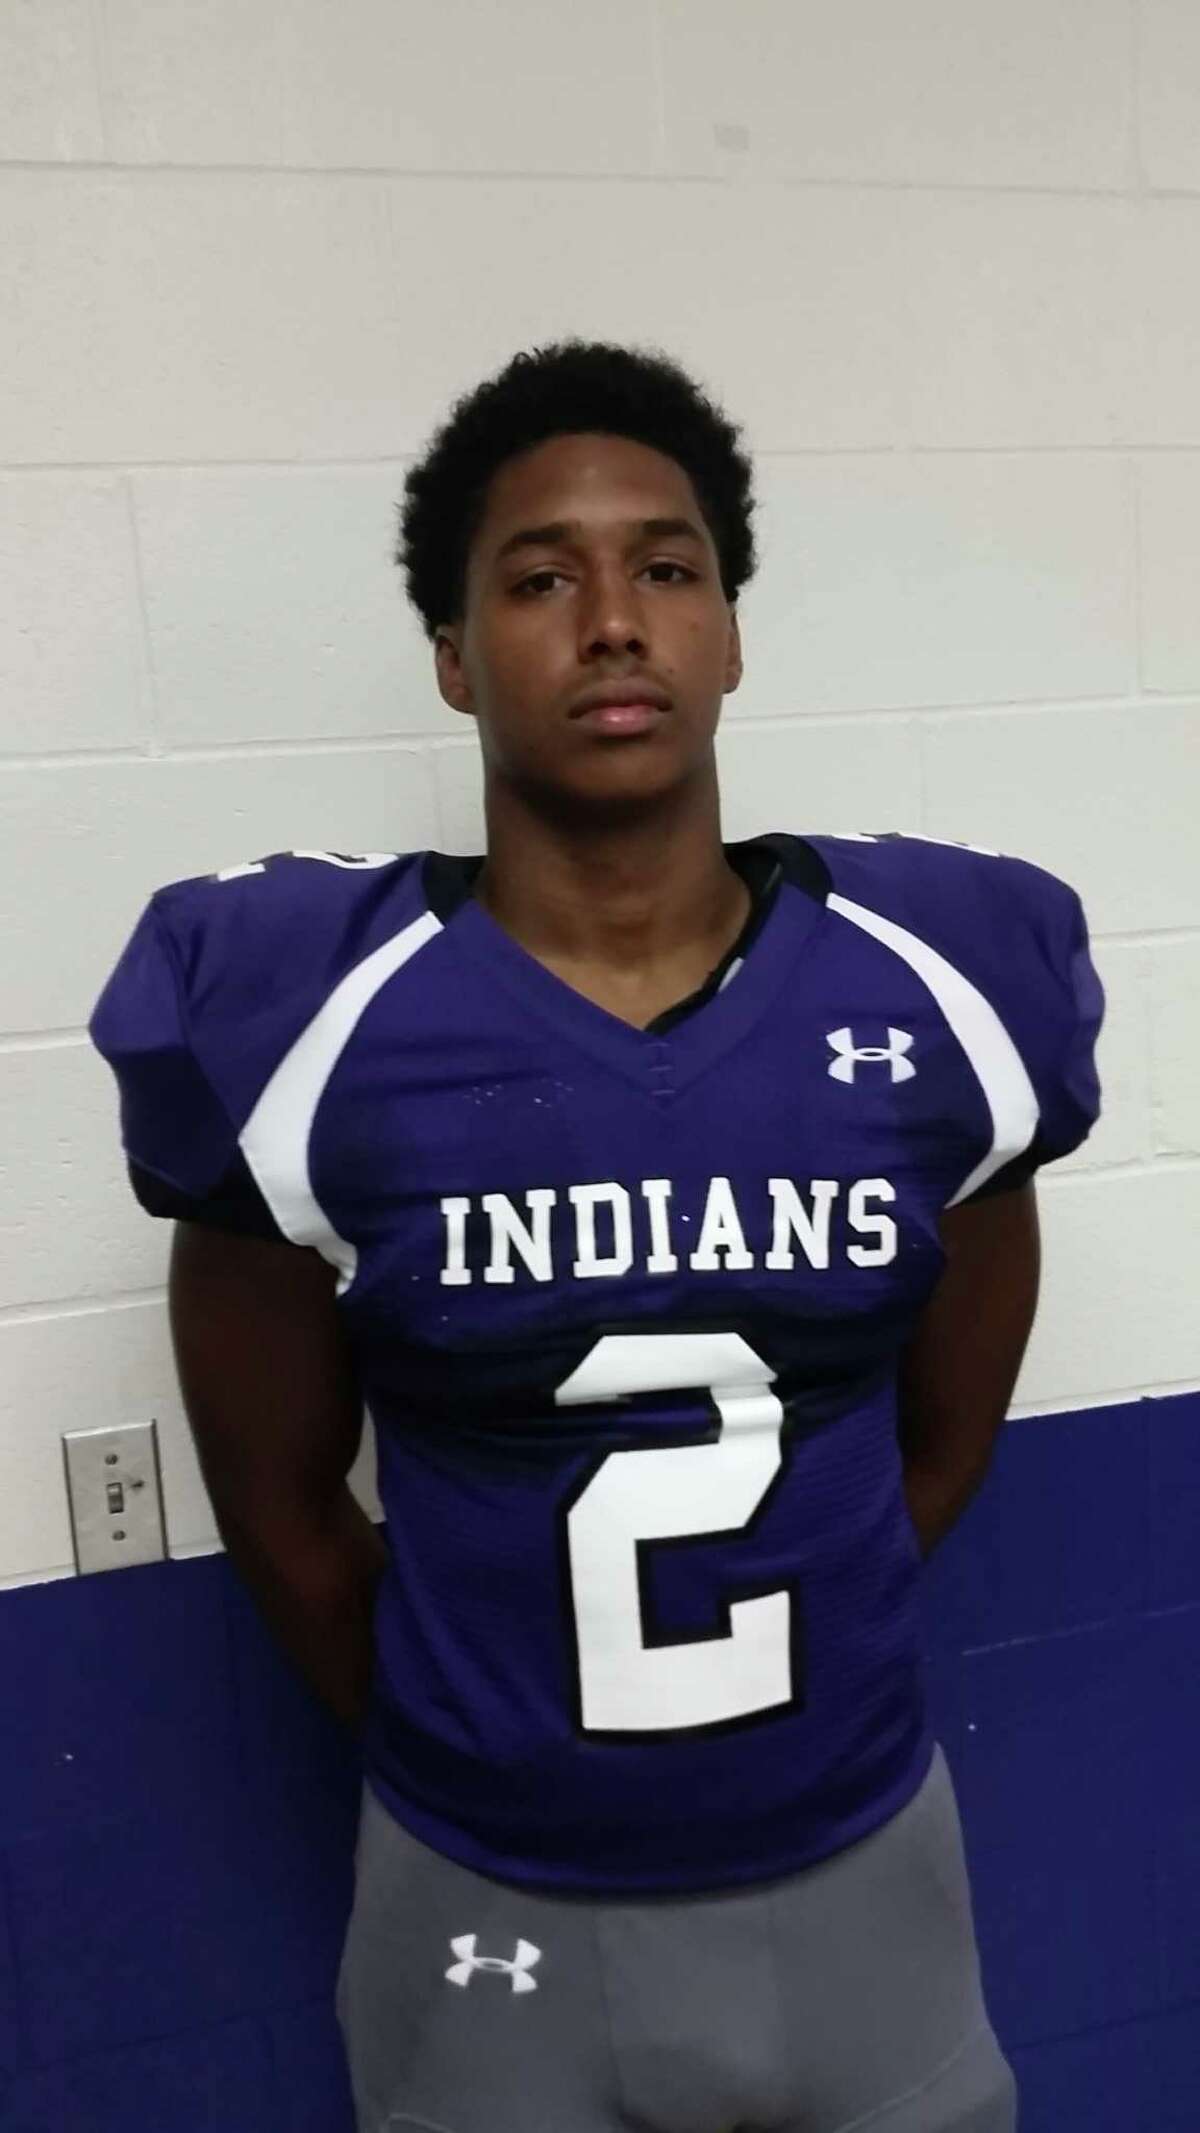 Trey Rembert, Port Neches-Groves Position: LB Height: 6-0 Weight: 205 pounds Grade: Senior Rembert is a four-year starter who led the team in tackles his junior season with 136 and is the heart and soul of defense.